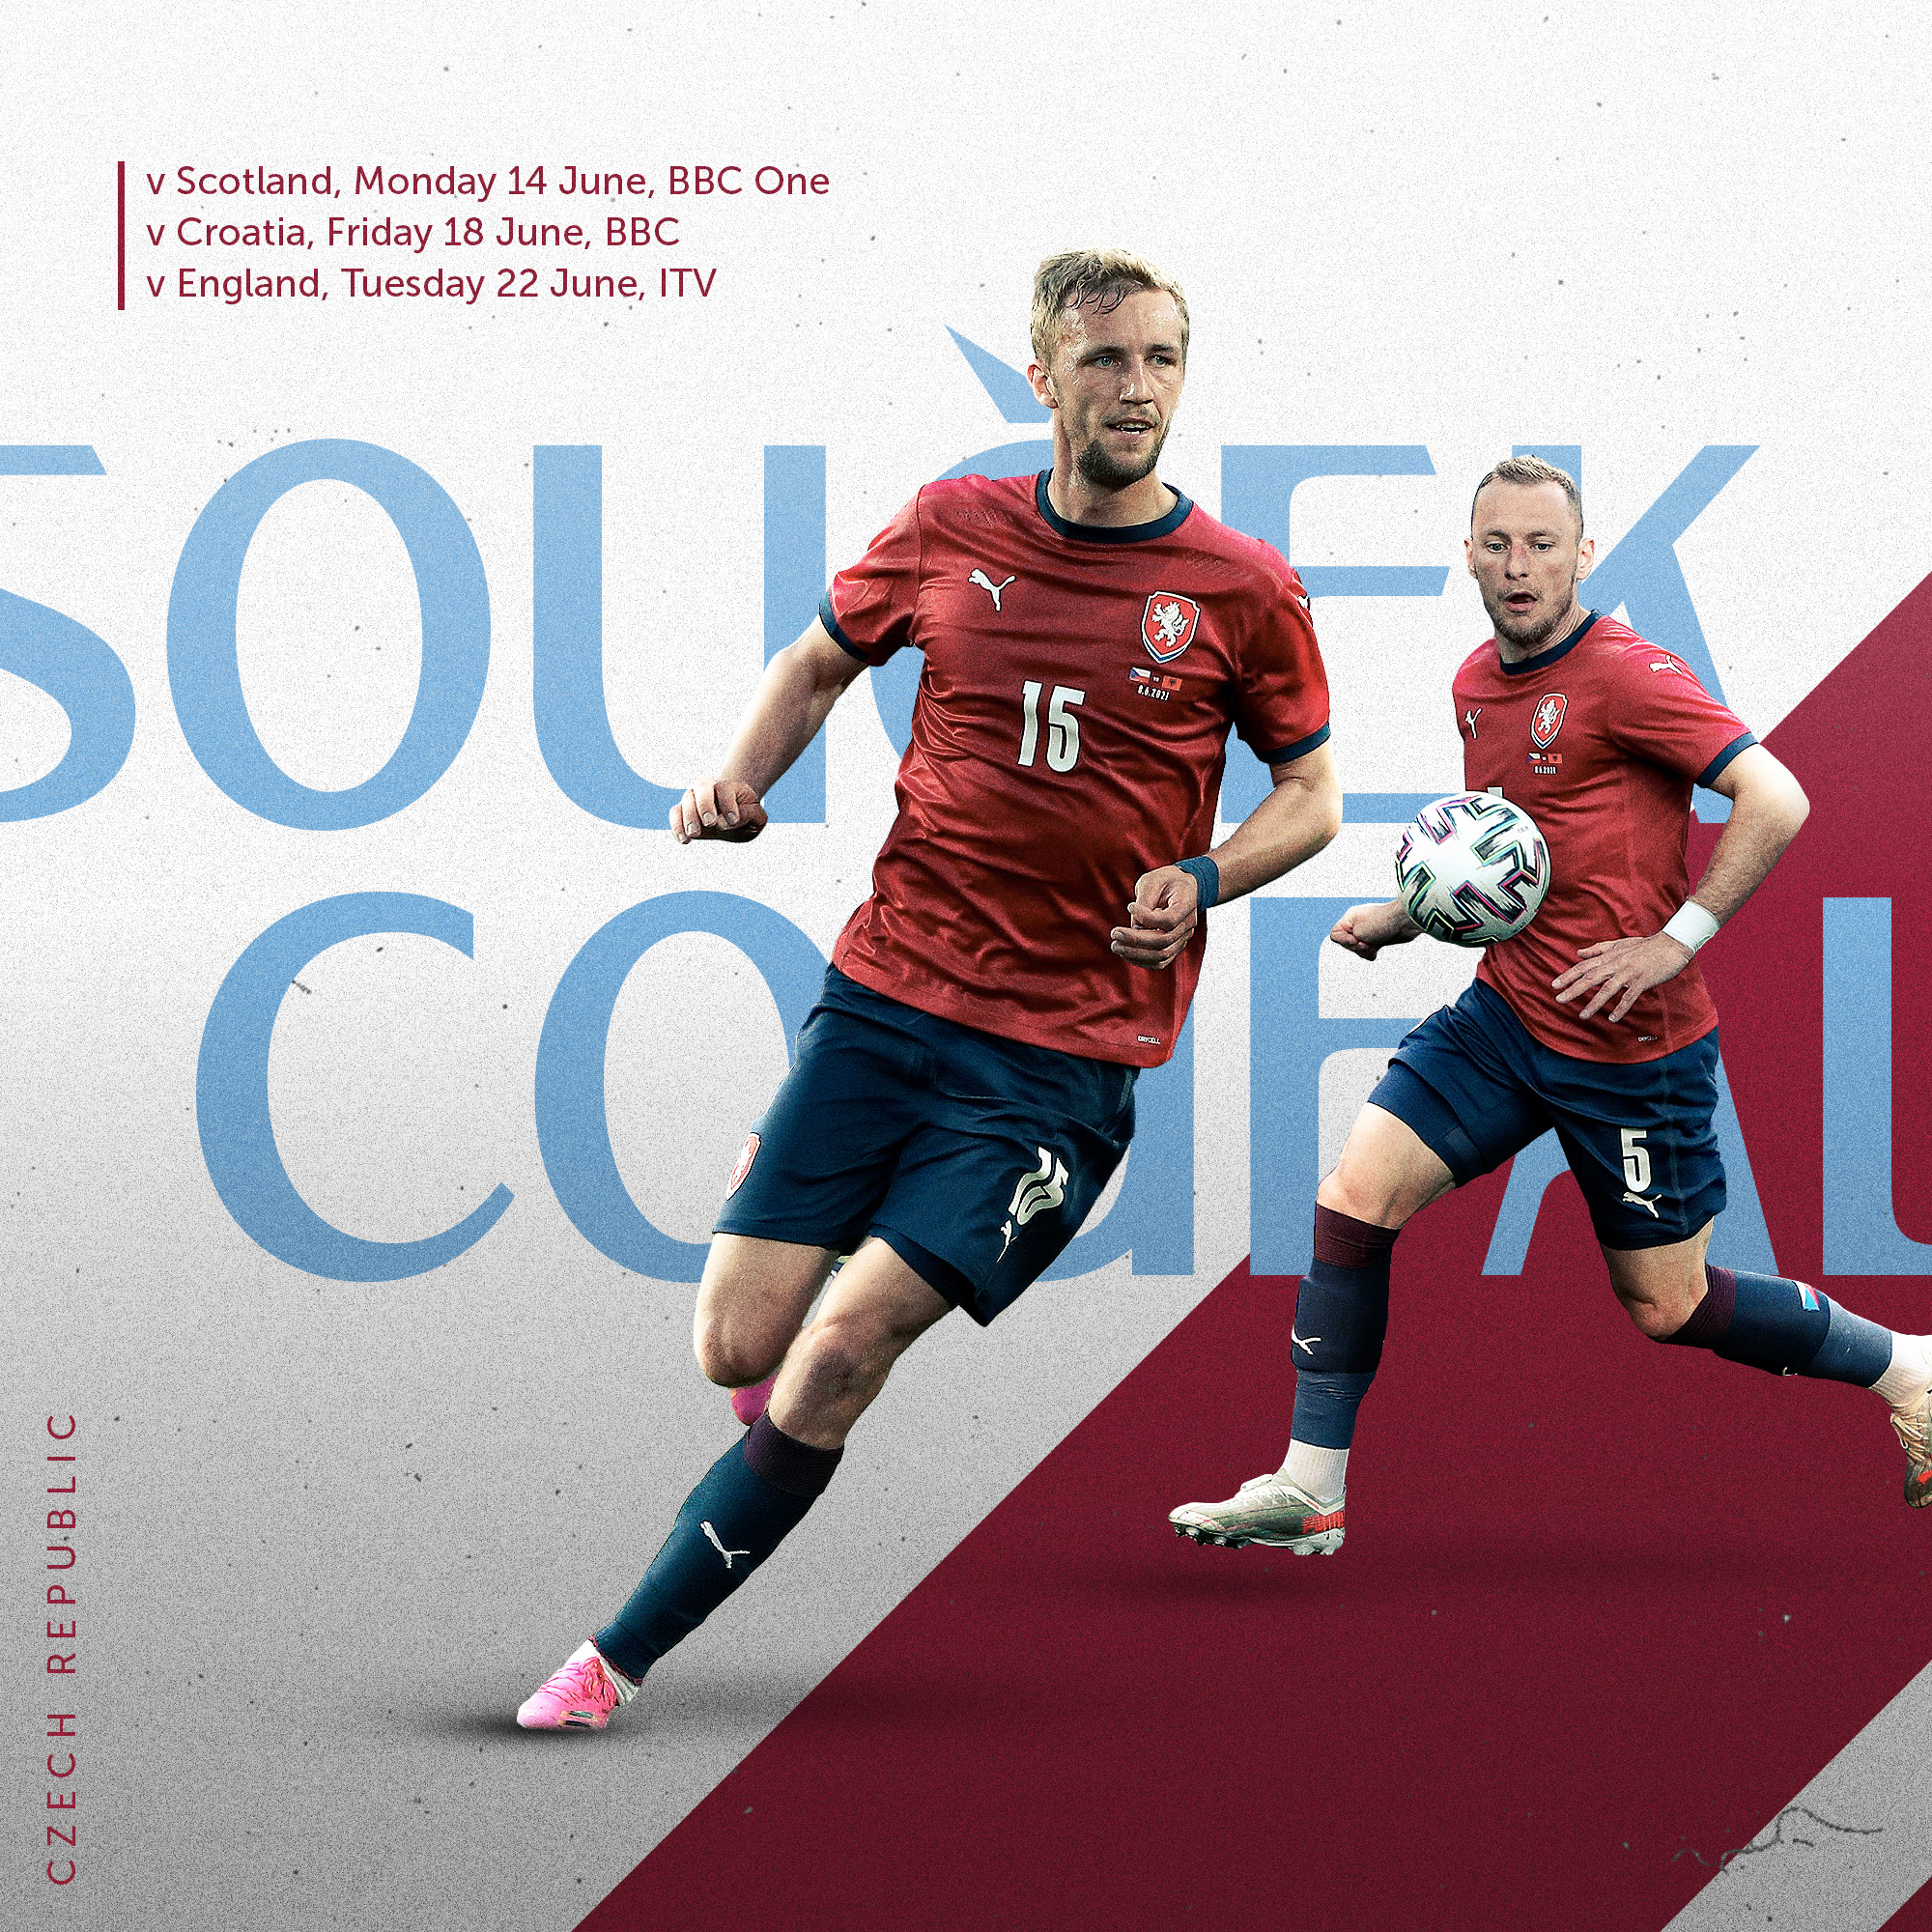 Coufal Euro 2020 graphic